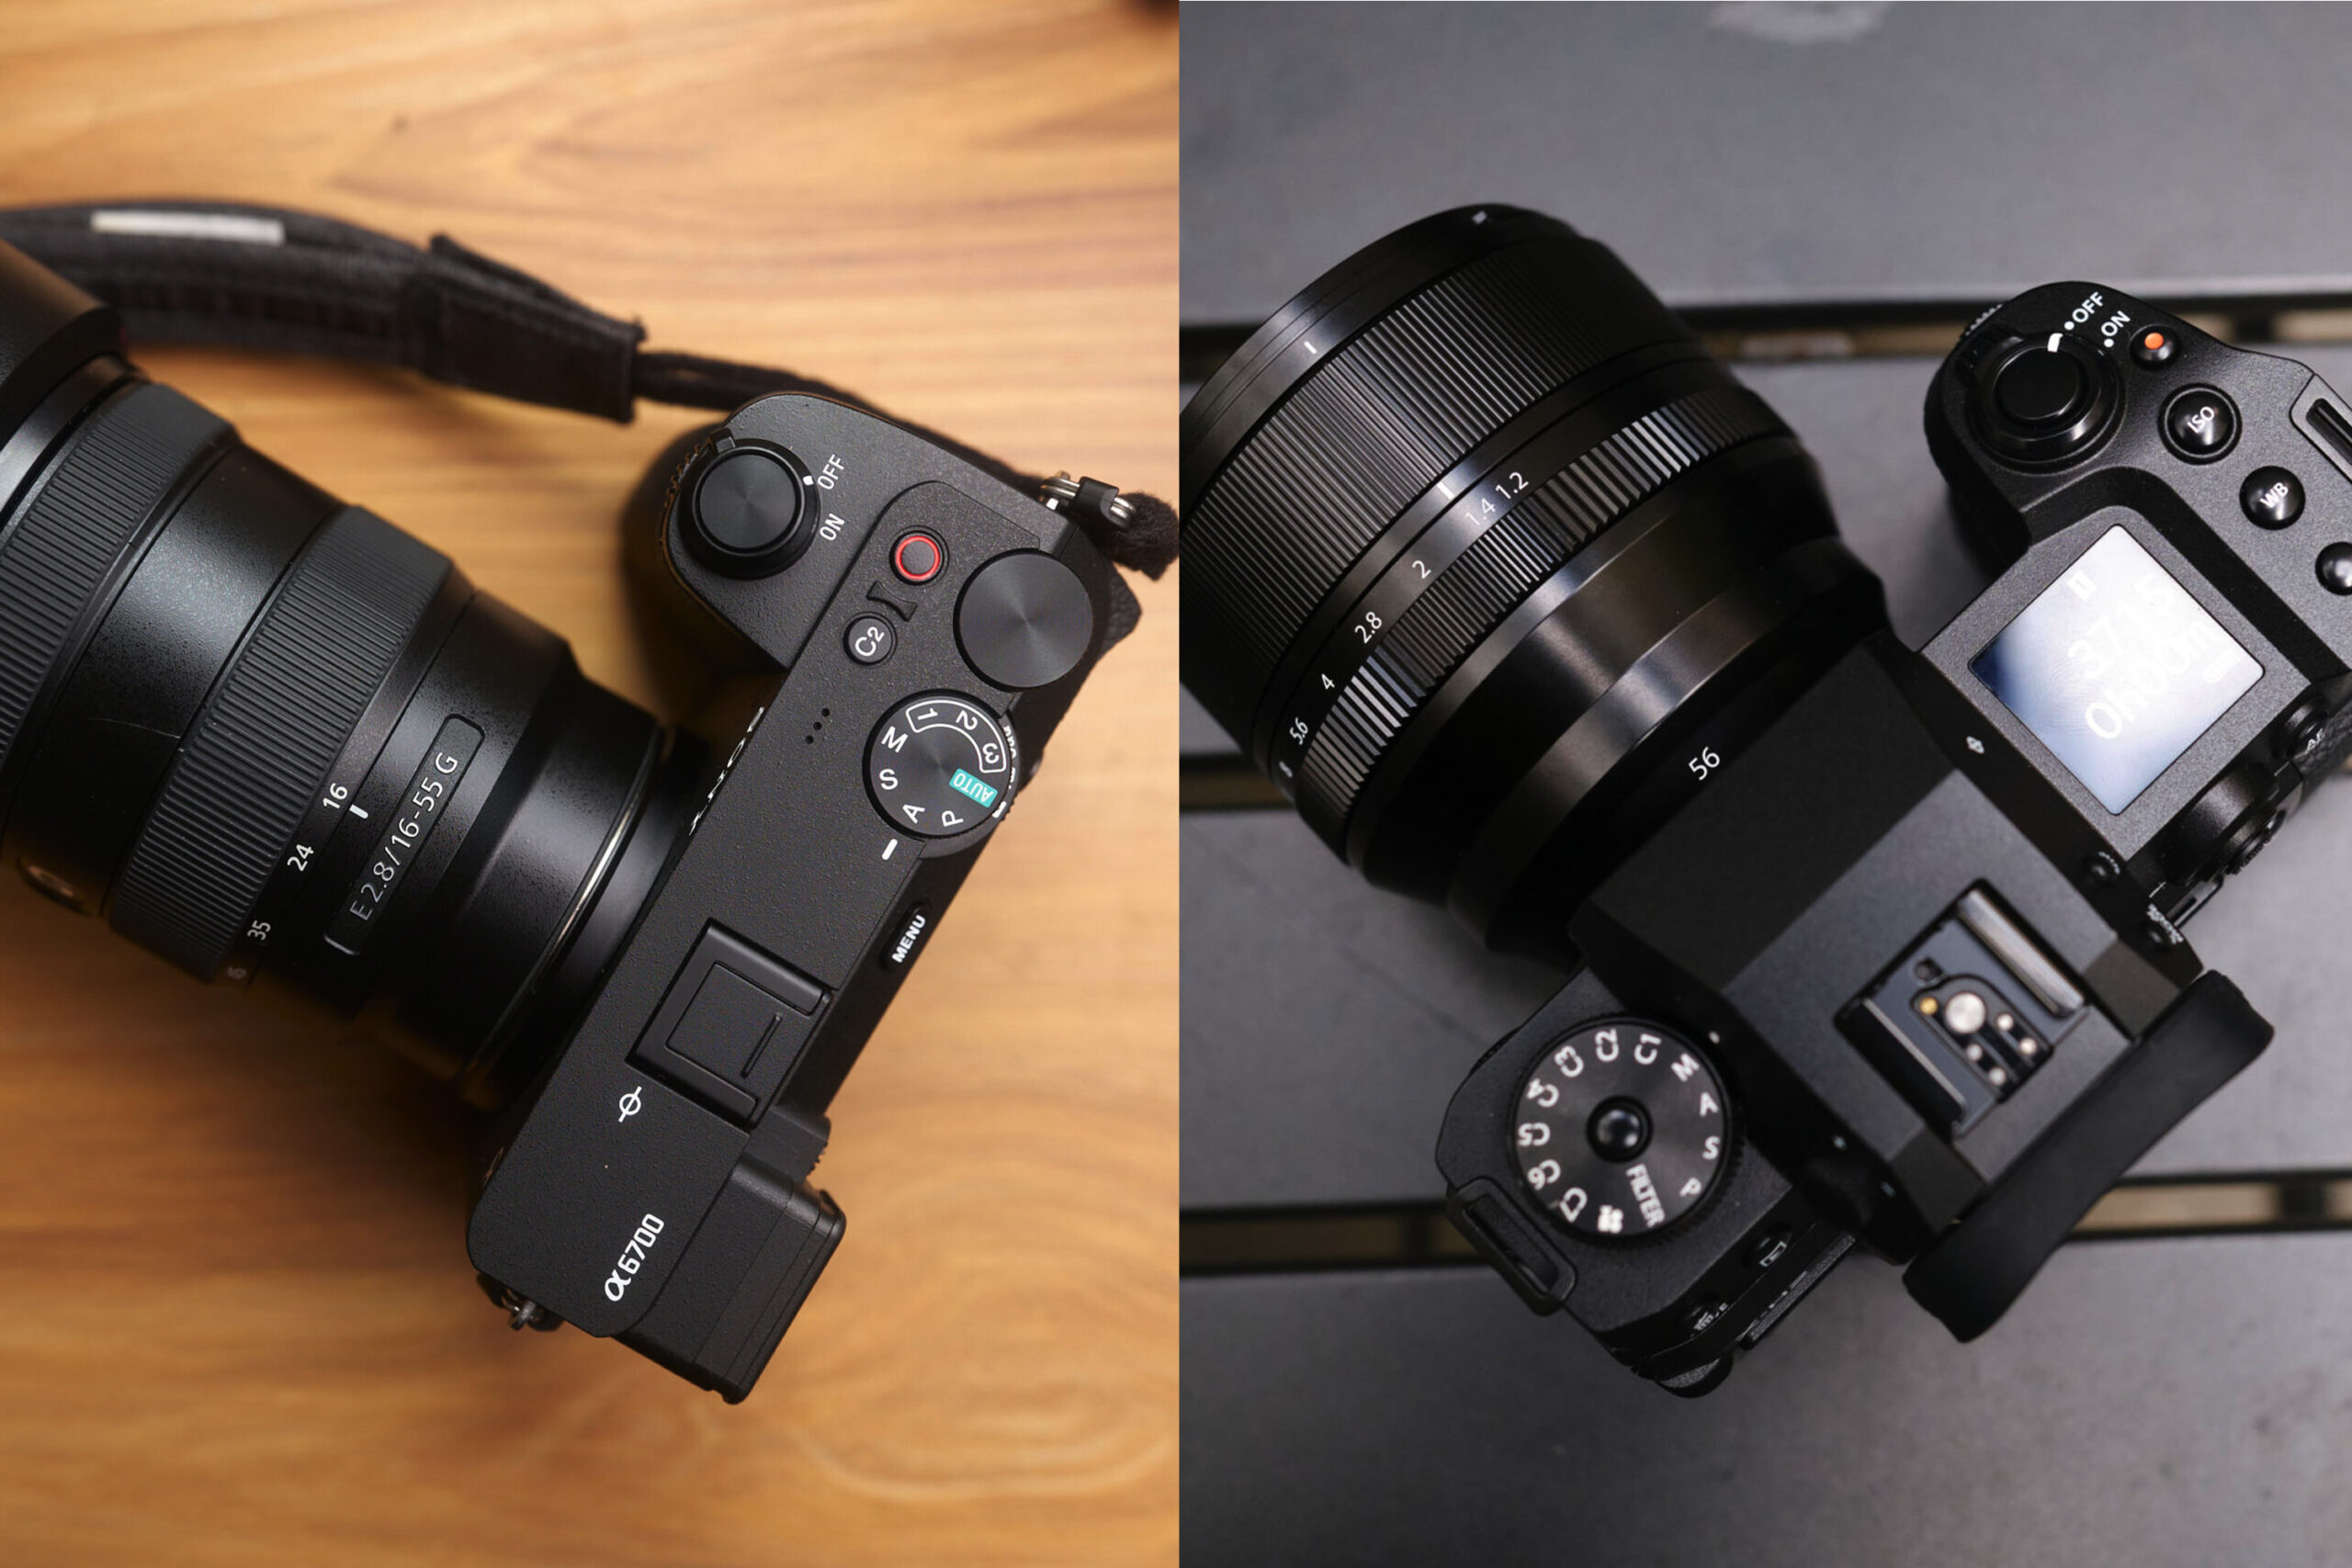 Sony a6700 Review: Exactly What You'd Expect